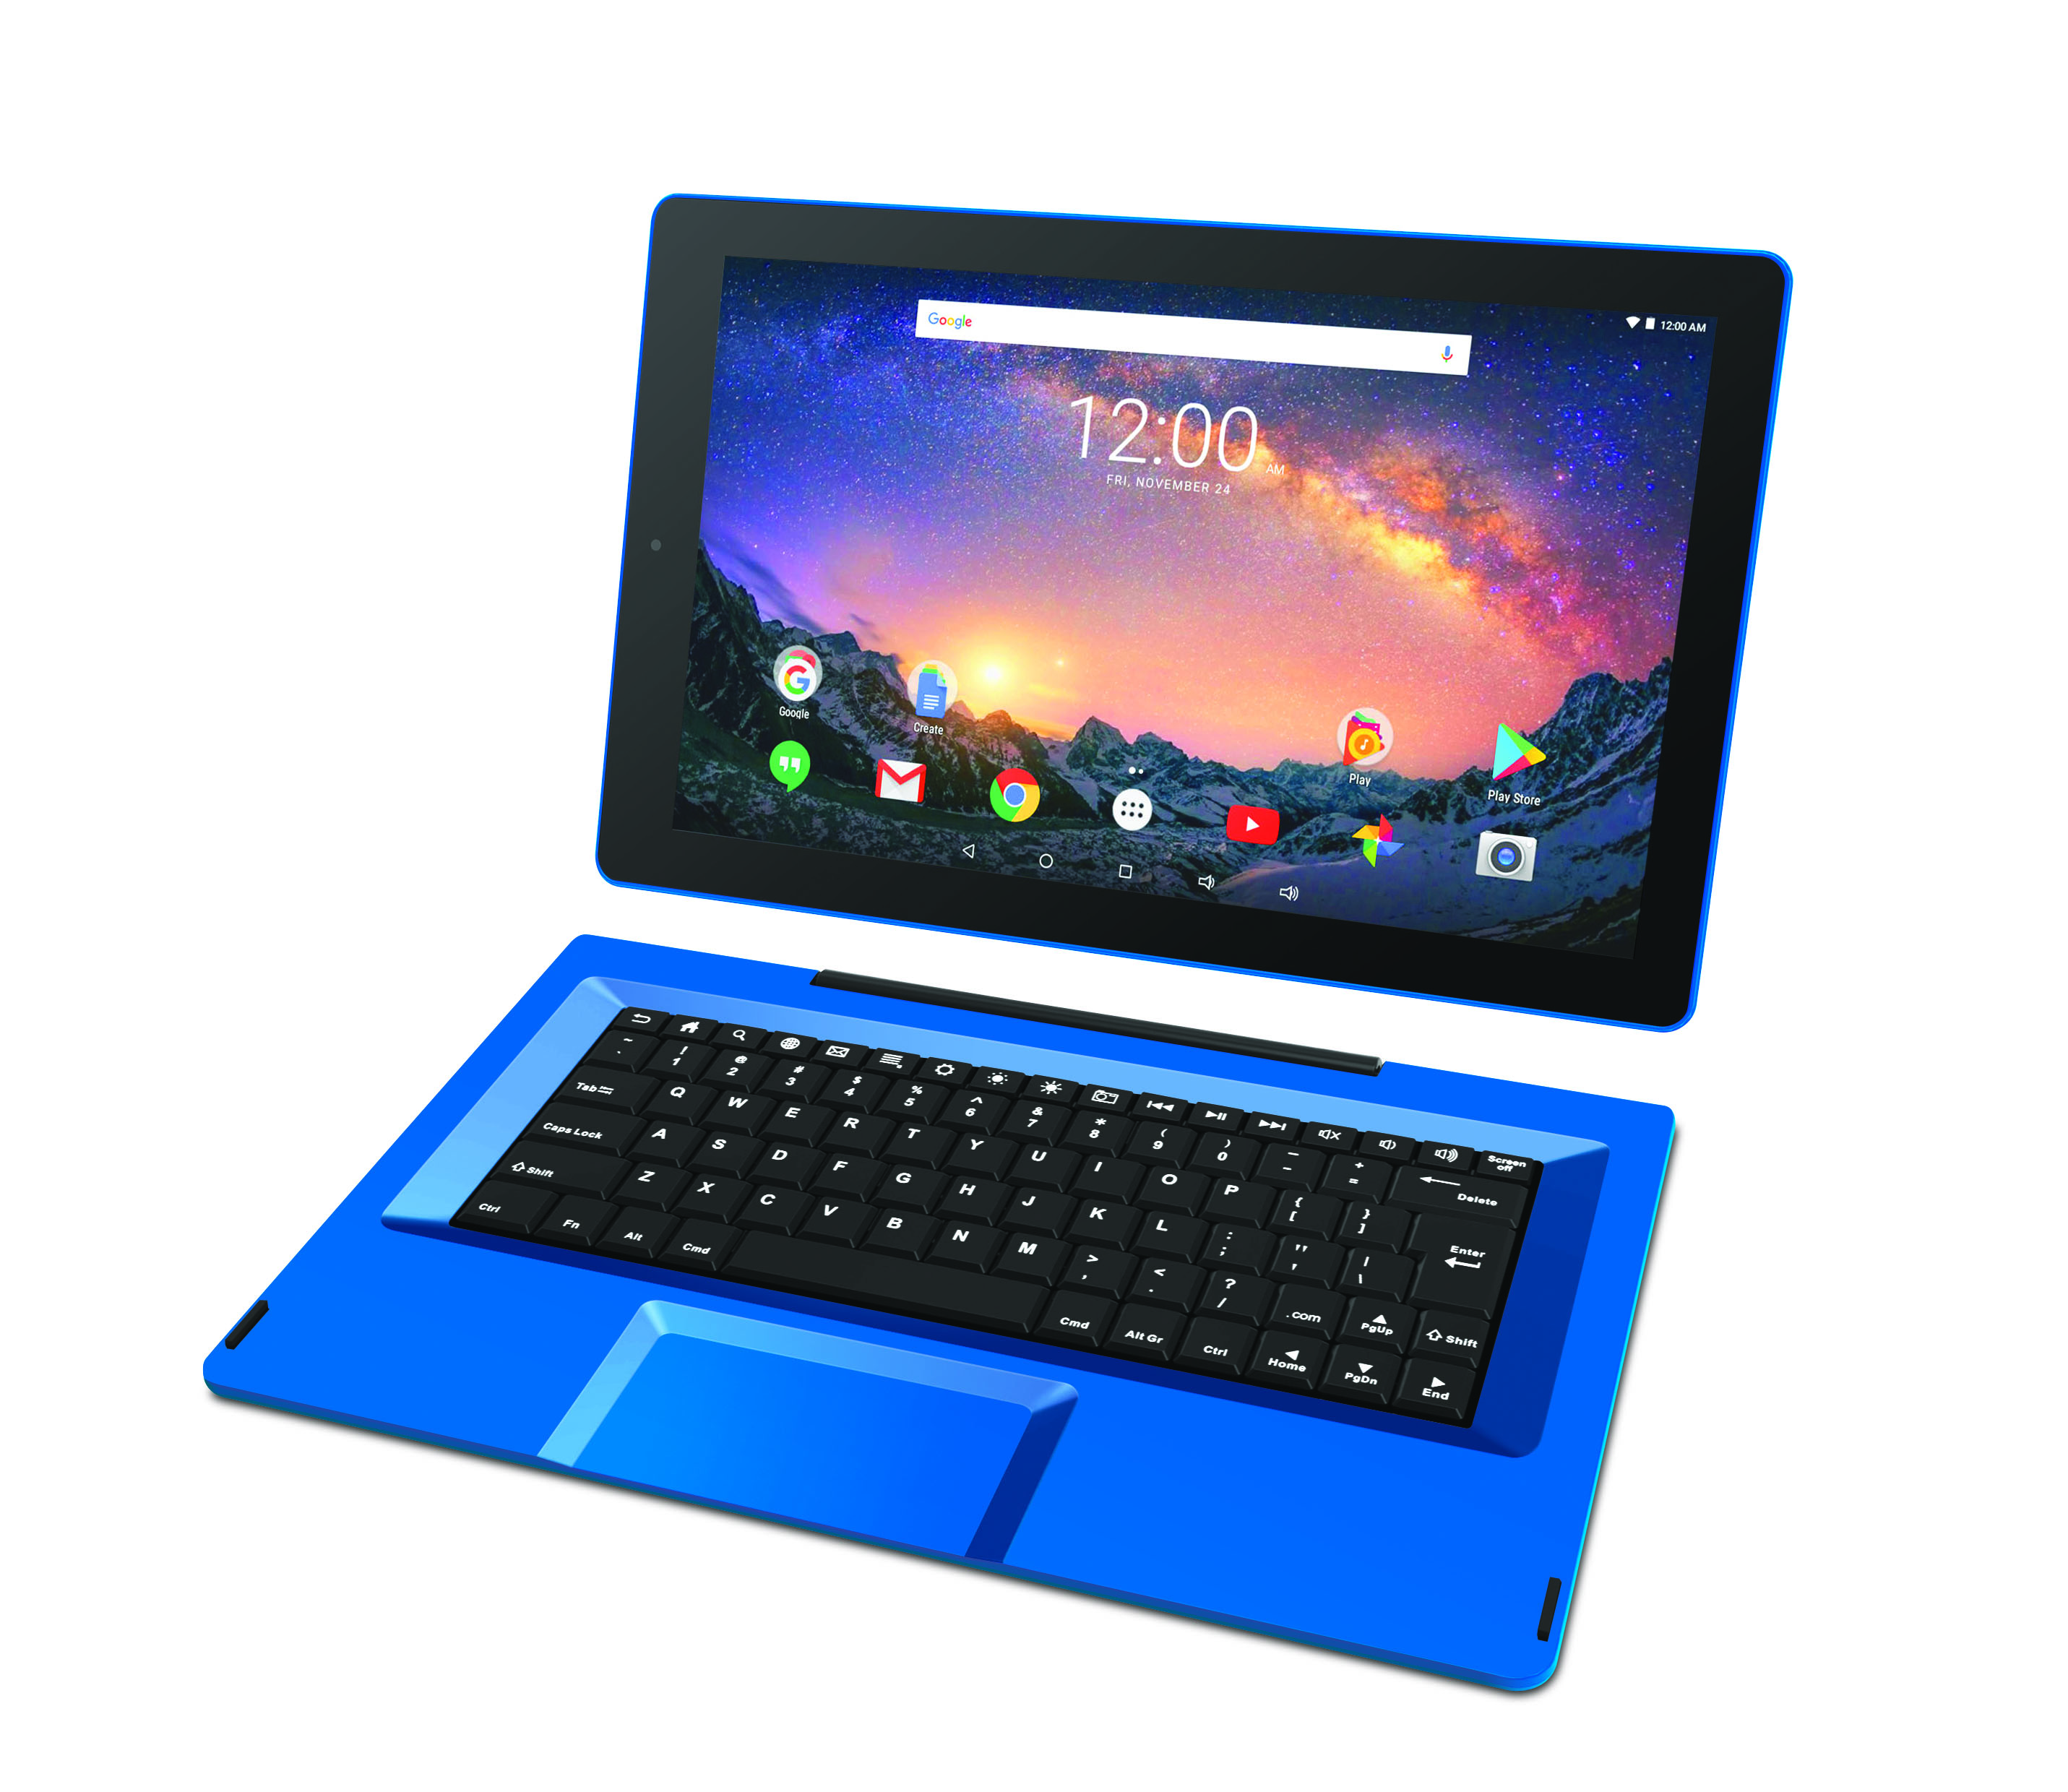 RCA Galileo Pro 11.5" 32GB 2-in-1 Tablet with Keyboard Case Android OS, Blue (Google Classroom Ready) - image 5 of 5